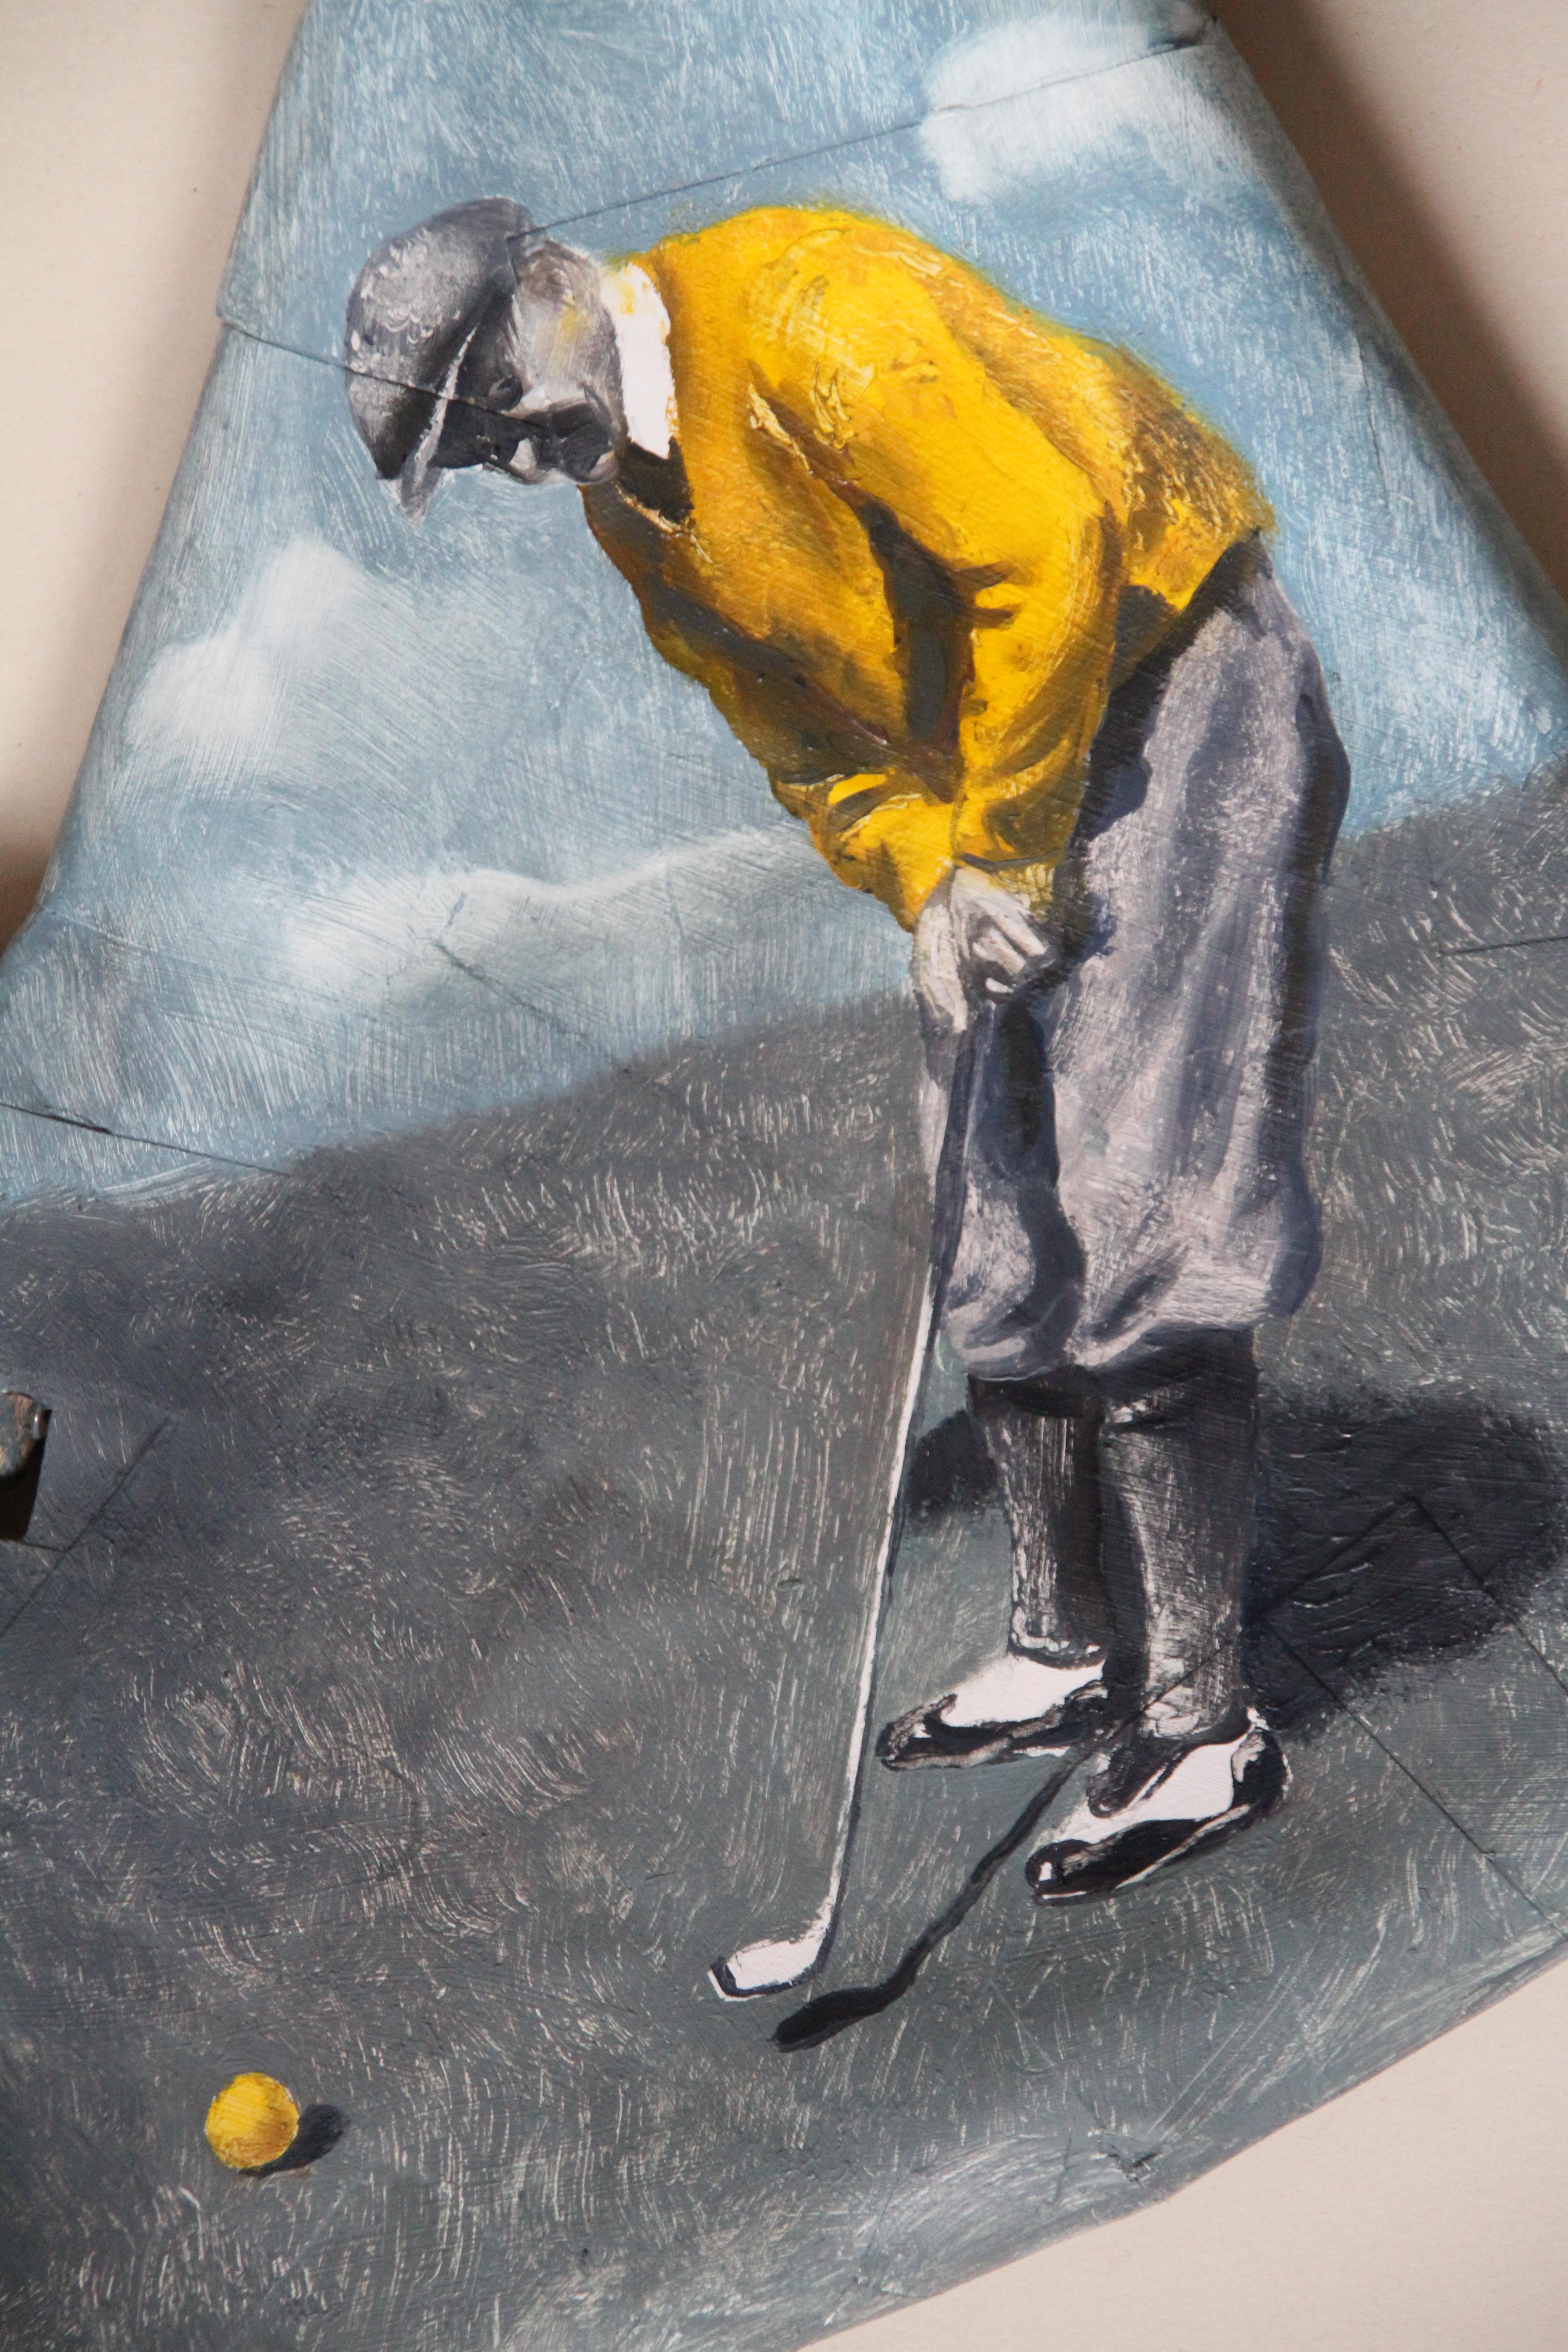 One more (vintage golfer yellow shirt wood painting sculpture tridimensional) - Painting by Rudolf Kosow